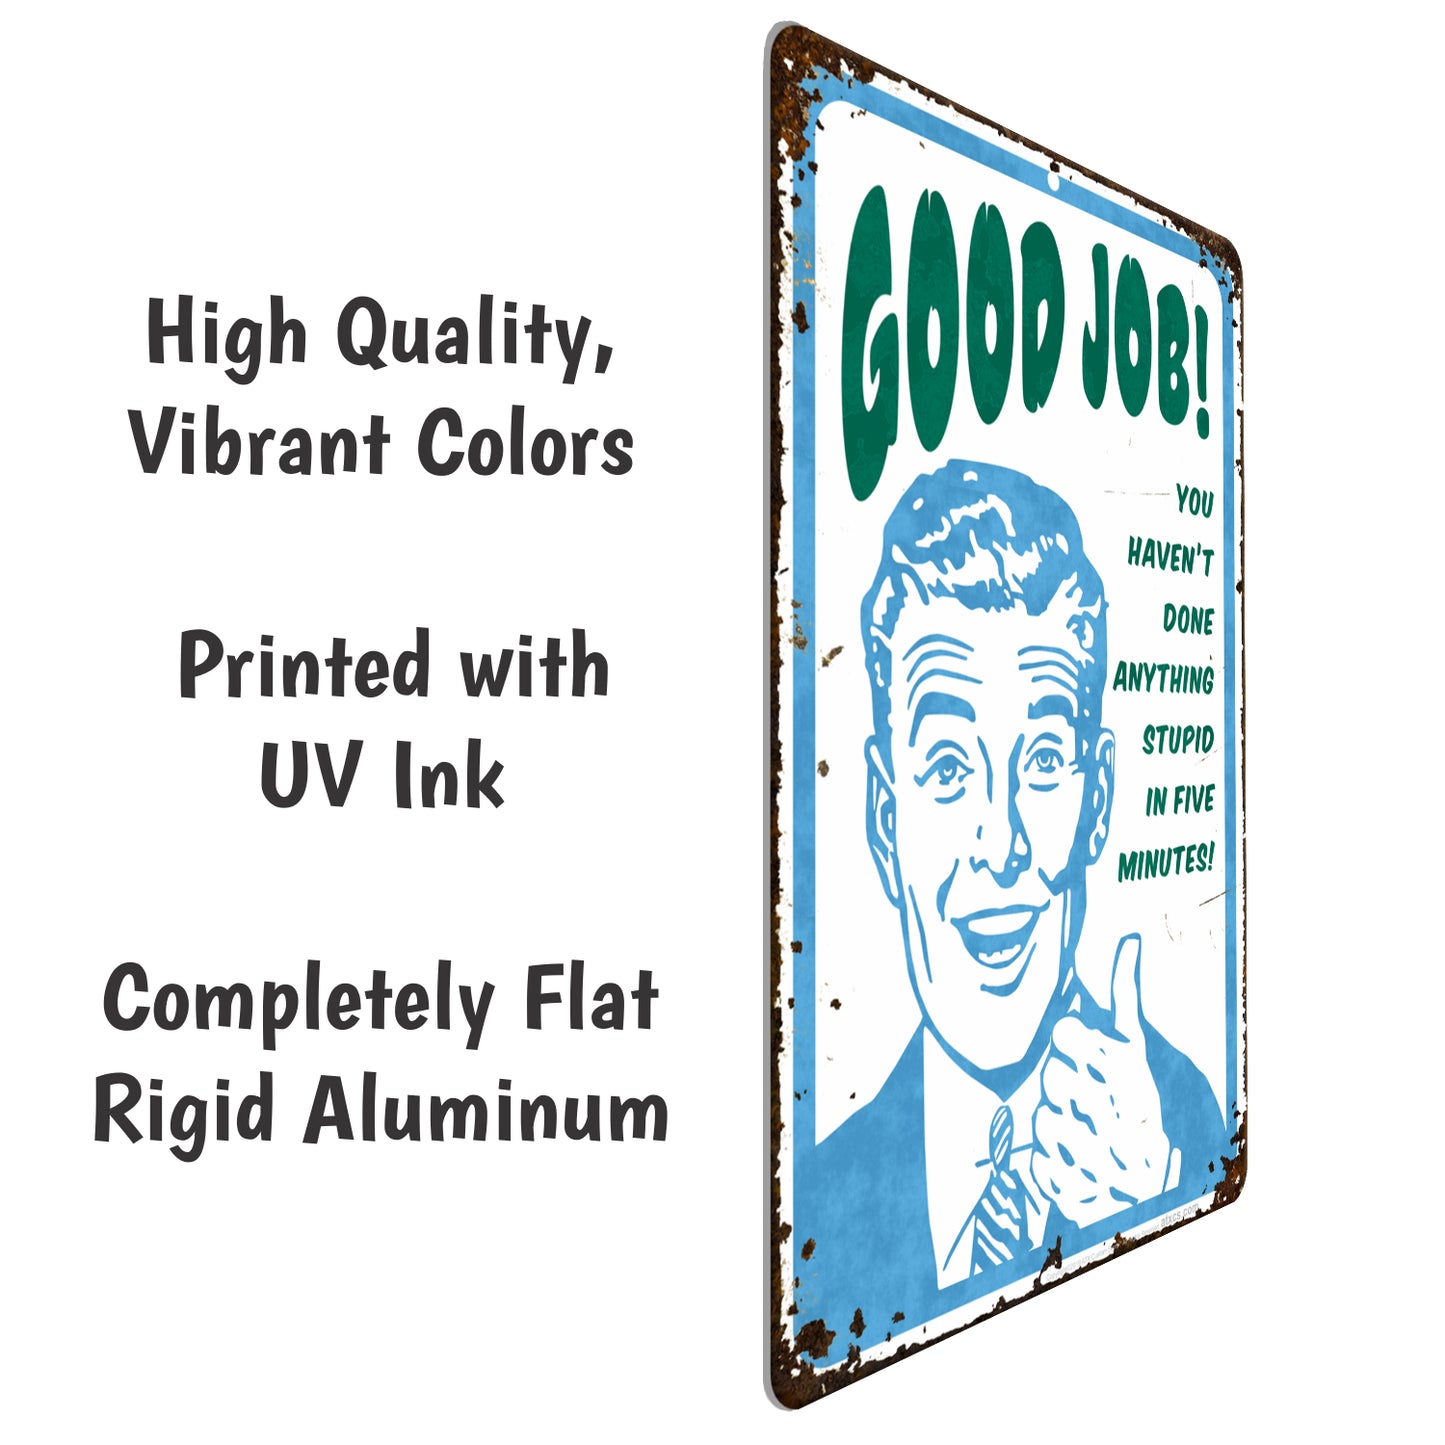 Funny Signs for Office - Good Job! You haven't Done Anything Stupid in Five Minutes! Metal Sign - Size 8 x 12 (Rusted Looking Sign)